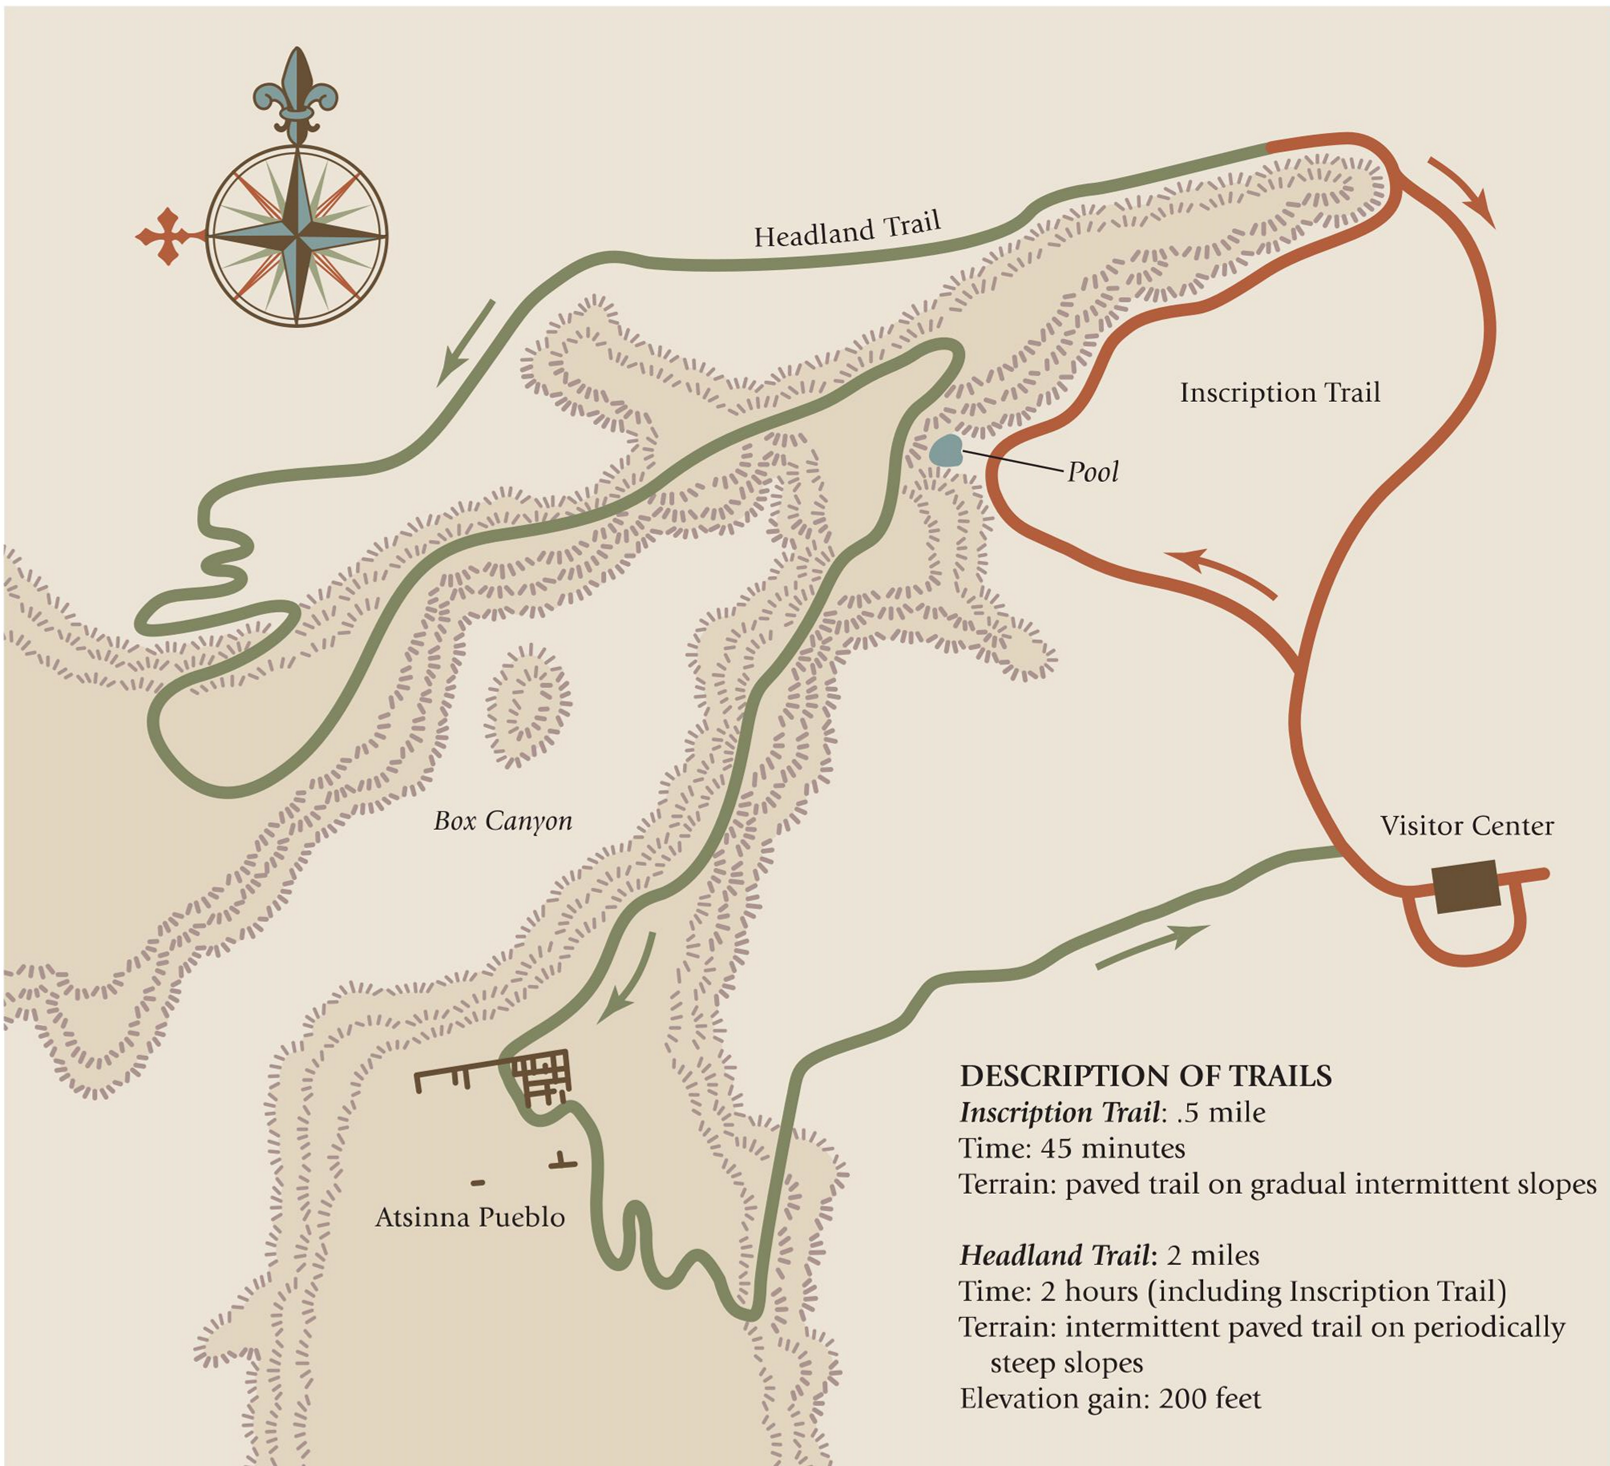 A trail map showing a shorter loop trail in red and a longer loop trail in green.